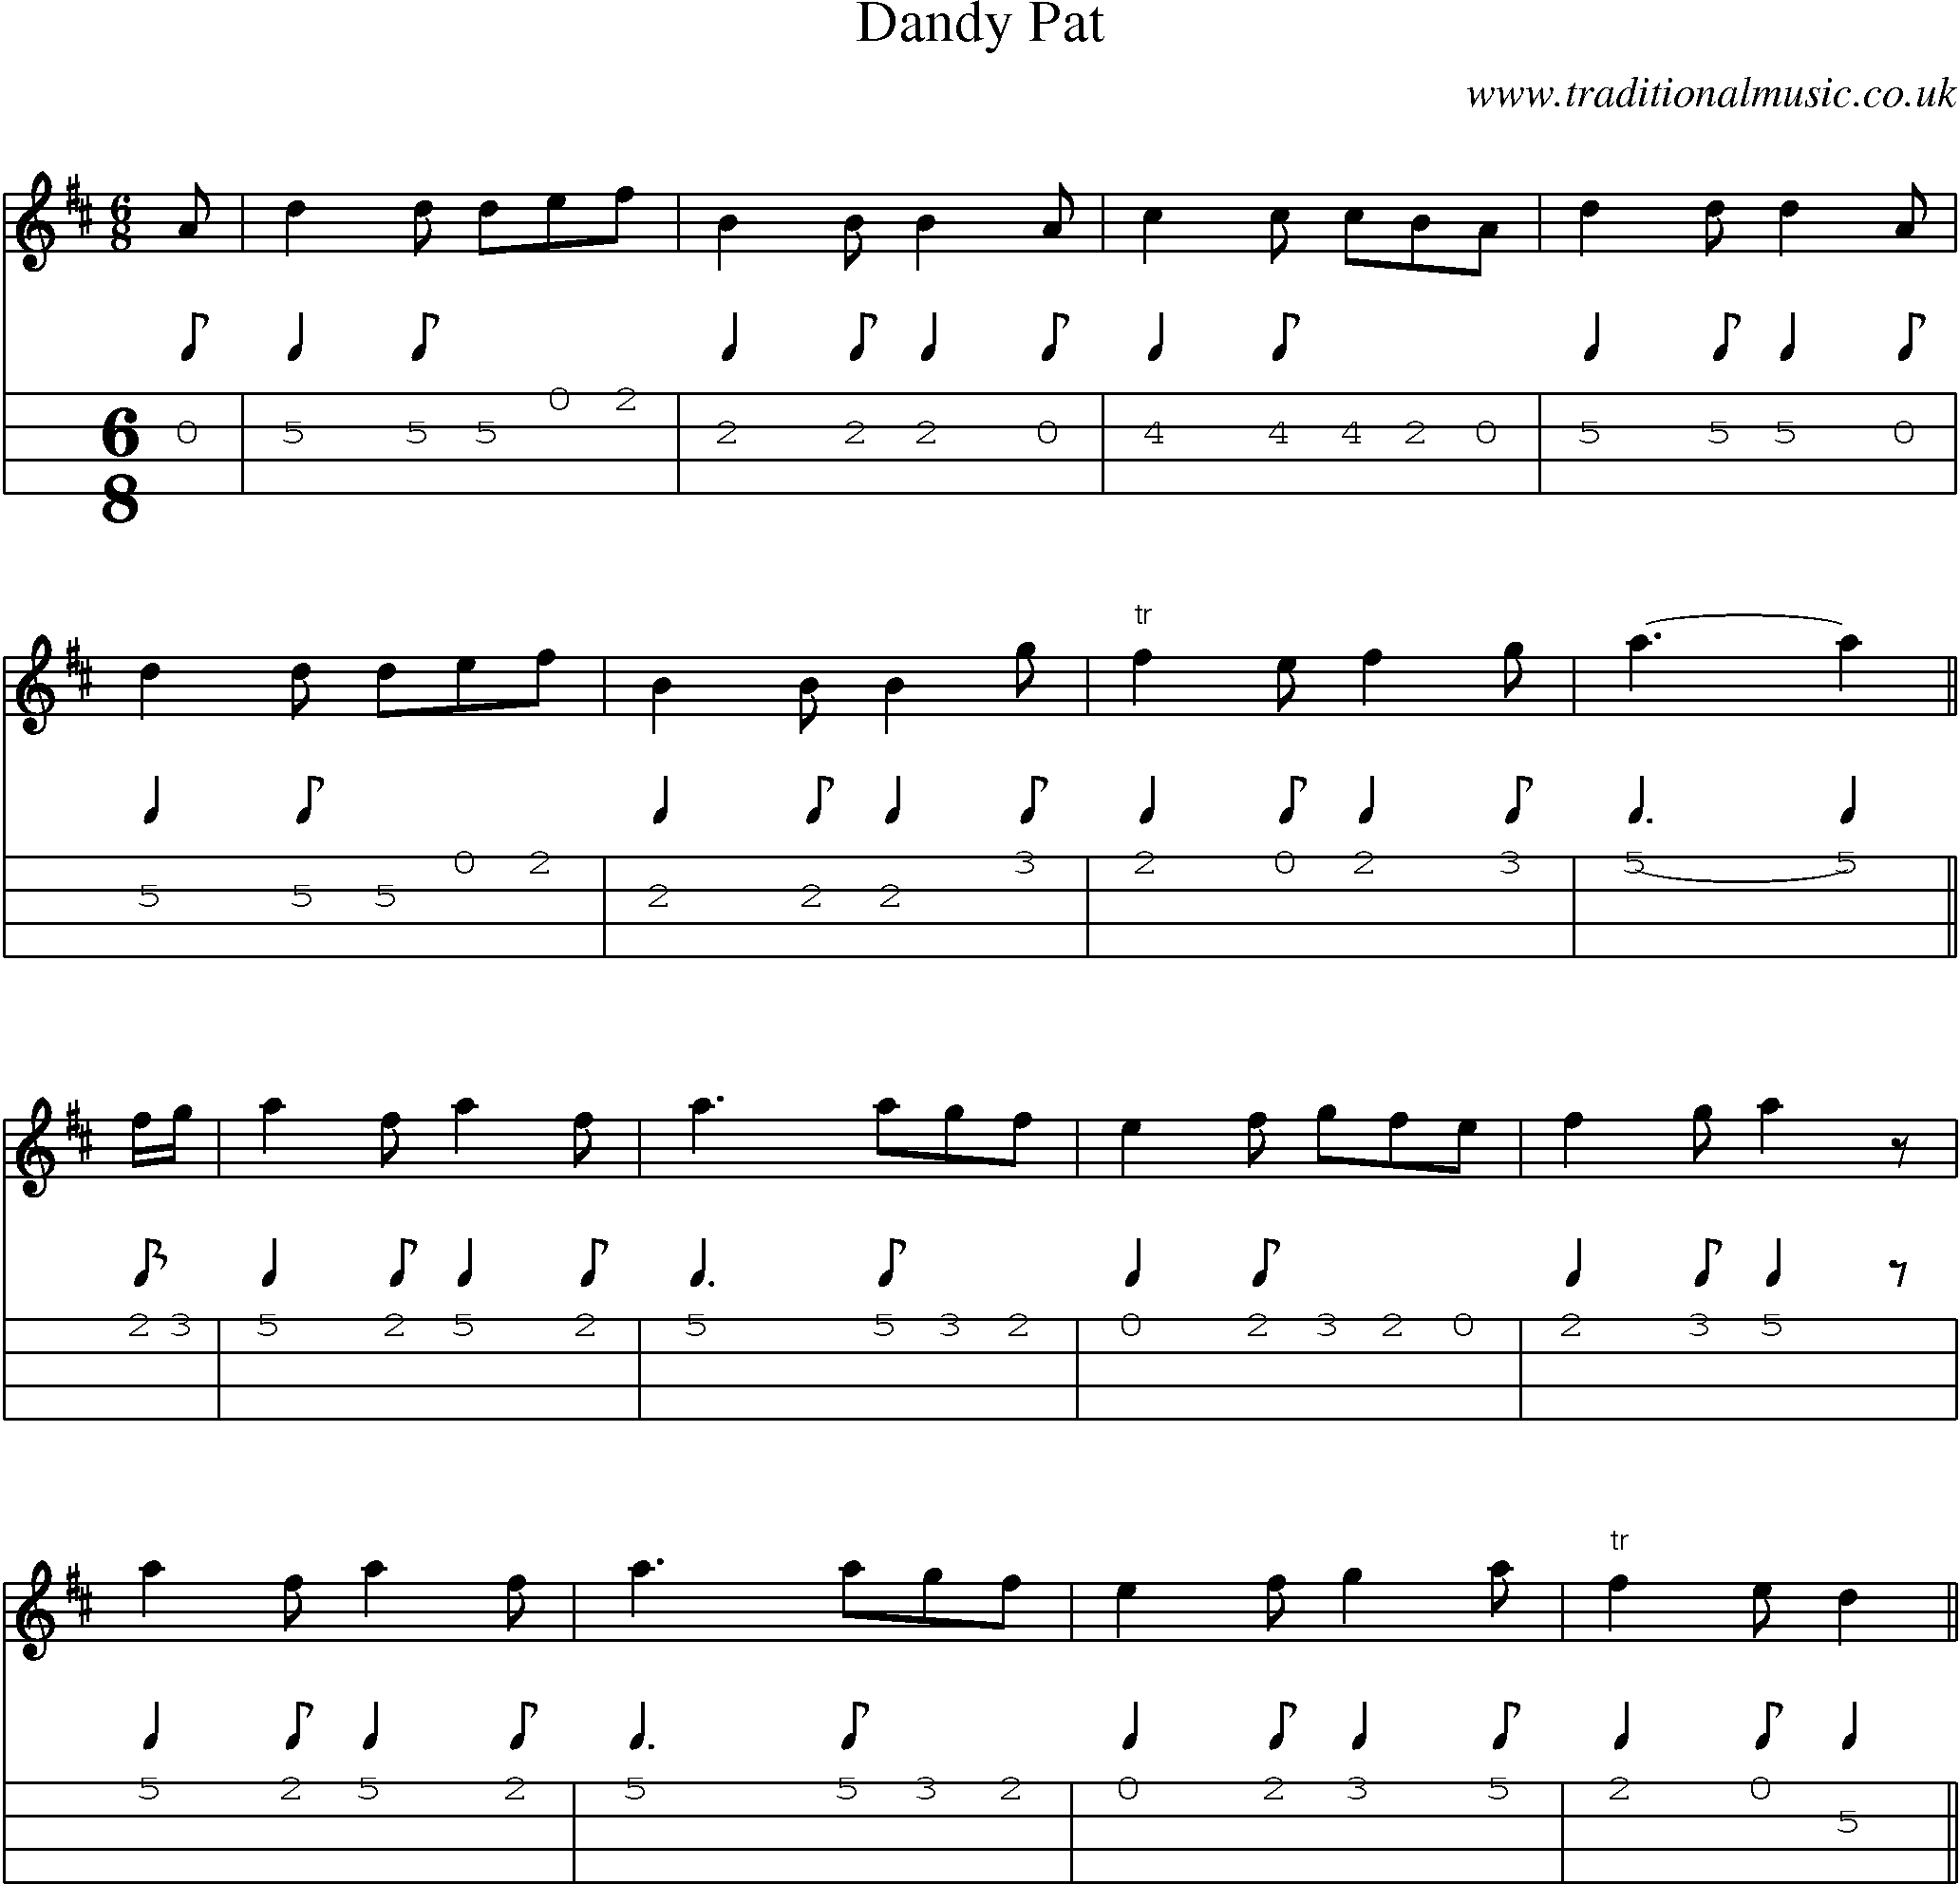 Music Score and Mandolin Tabs for Dandy Pat